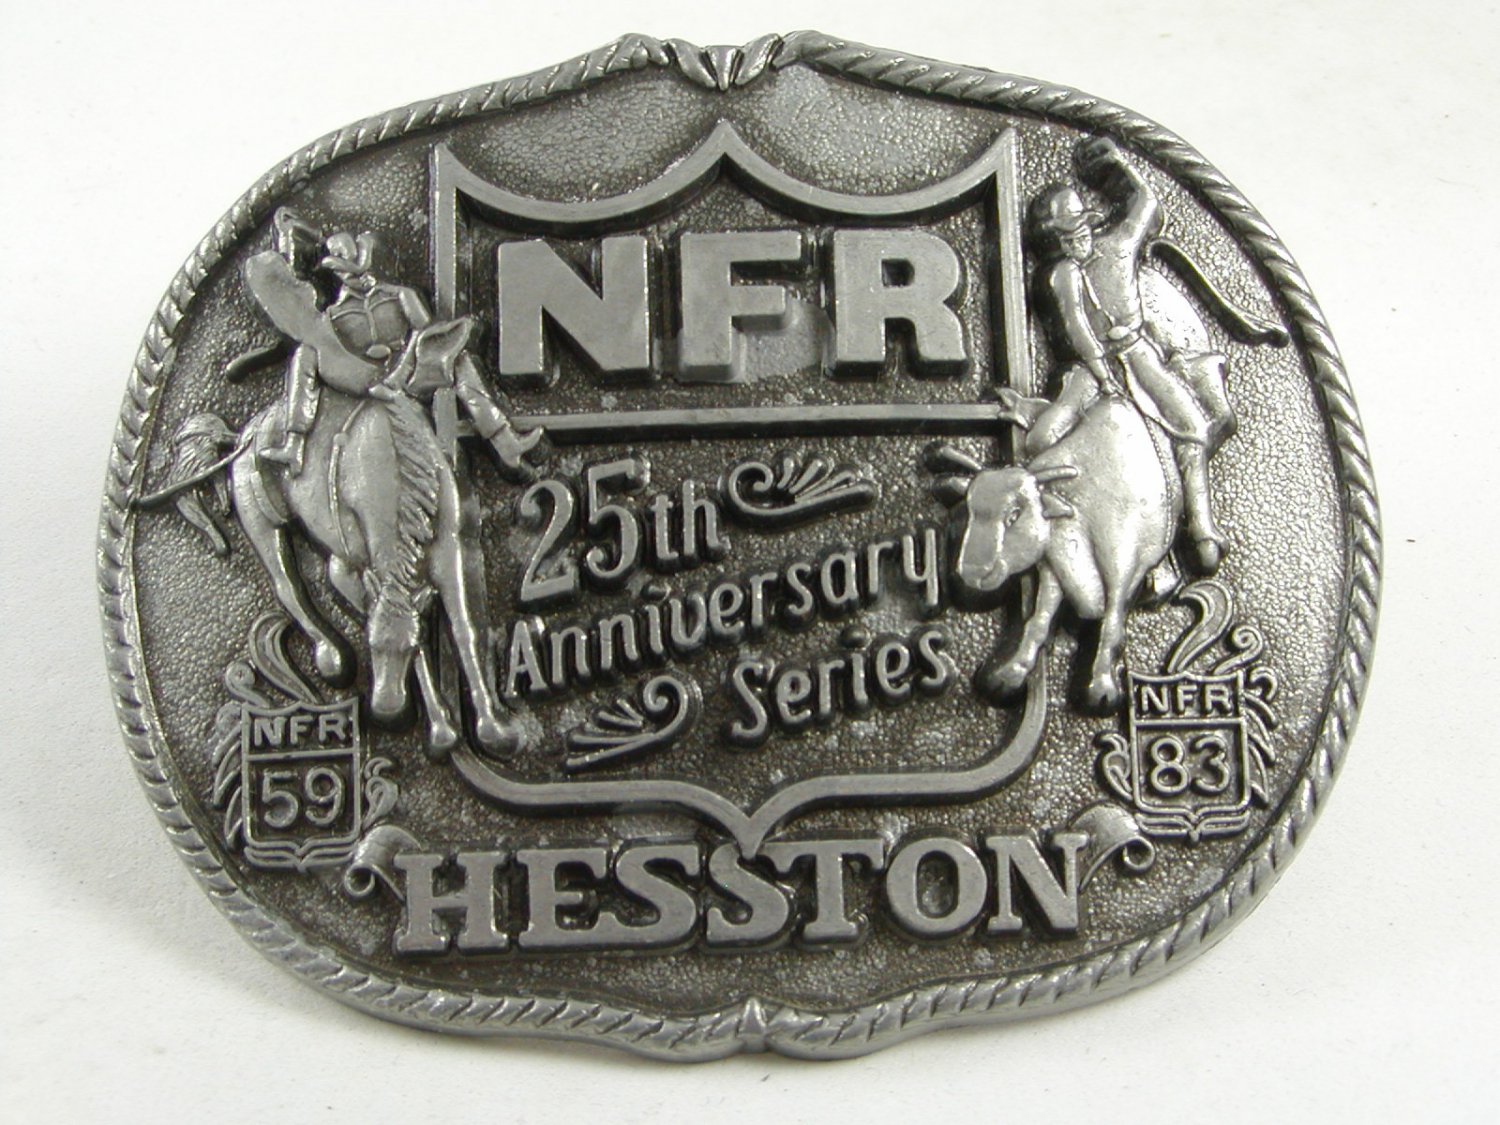 1983 National Finals Rodeo NFR 25th Anniversary Belt Buckle By Hesston ...